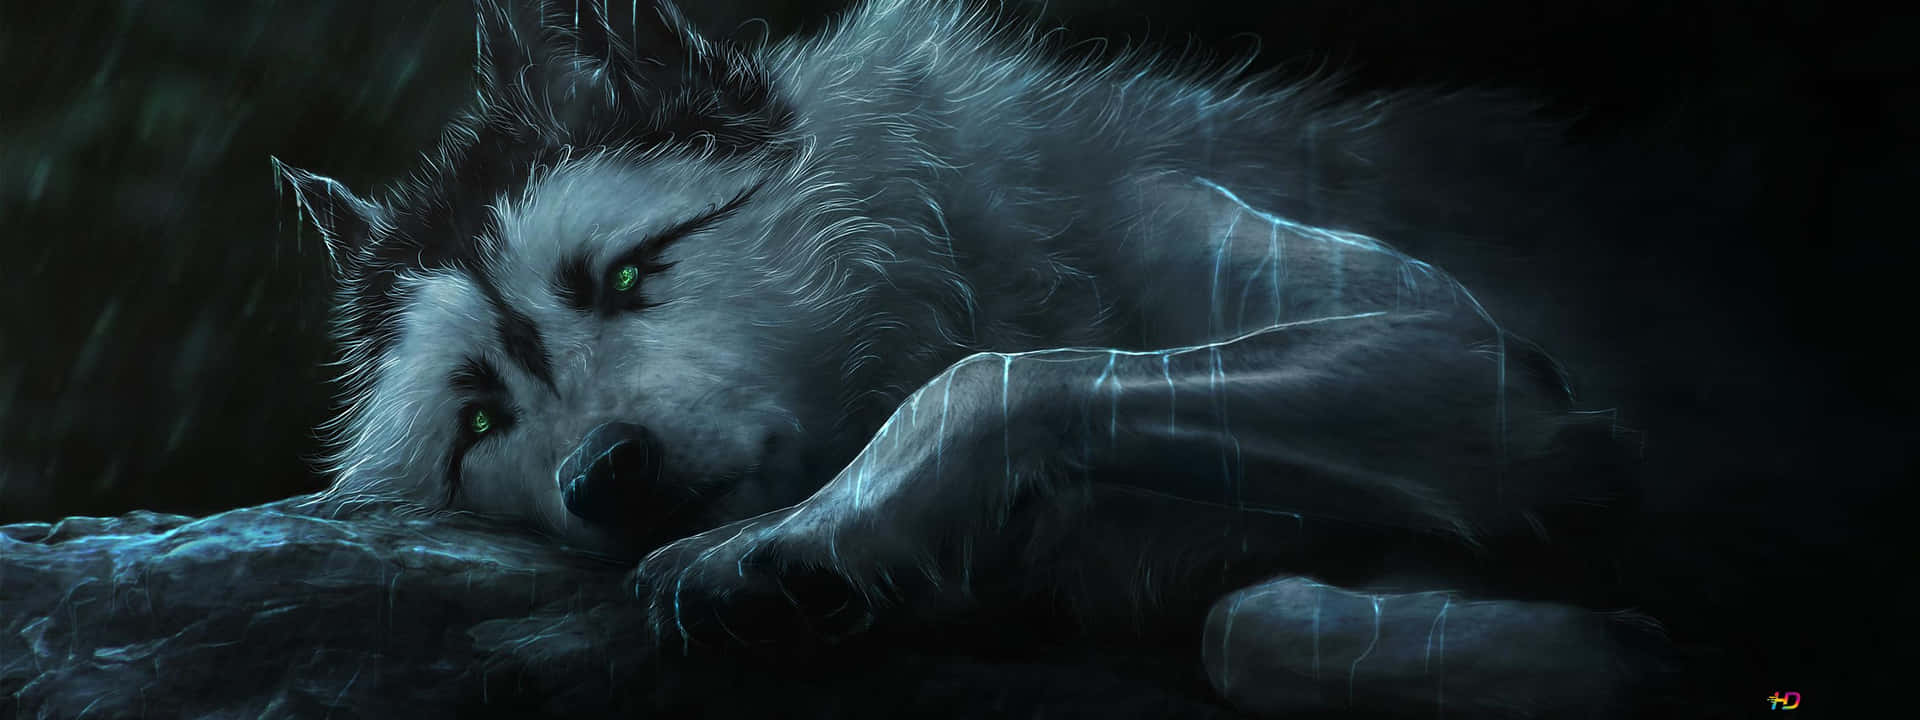 Dark, majestic, and strong – this cool anime wolf is a show of power and grace. Wallpaper